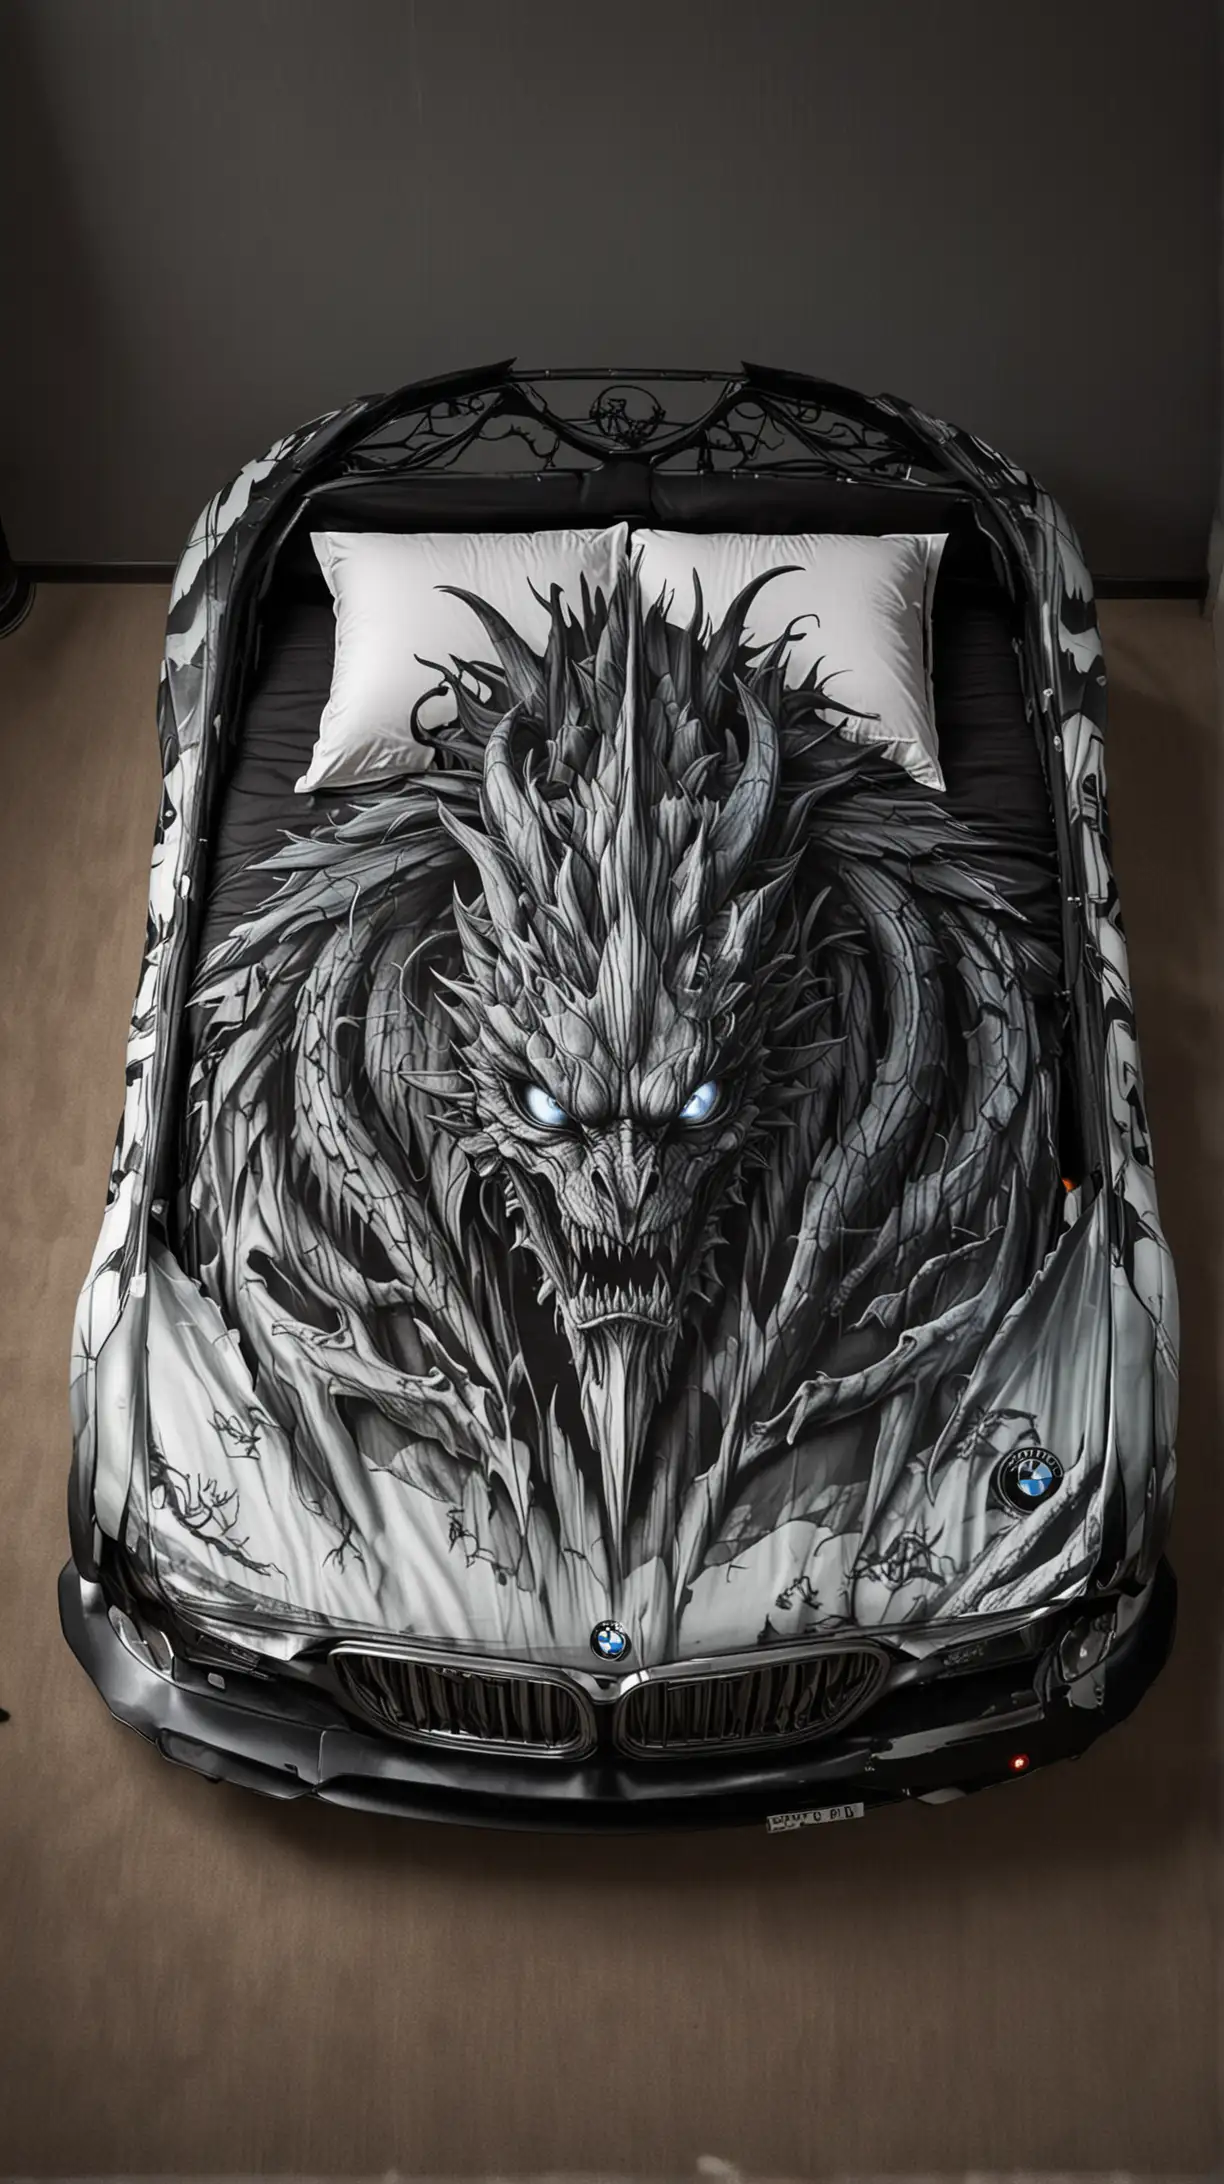 Double bed in the shape of a BMW car with headlights on and with graphics in the shape of an evil and good dragon